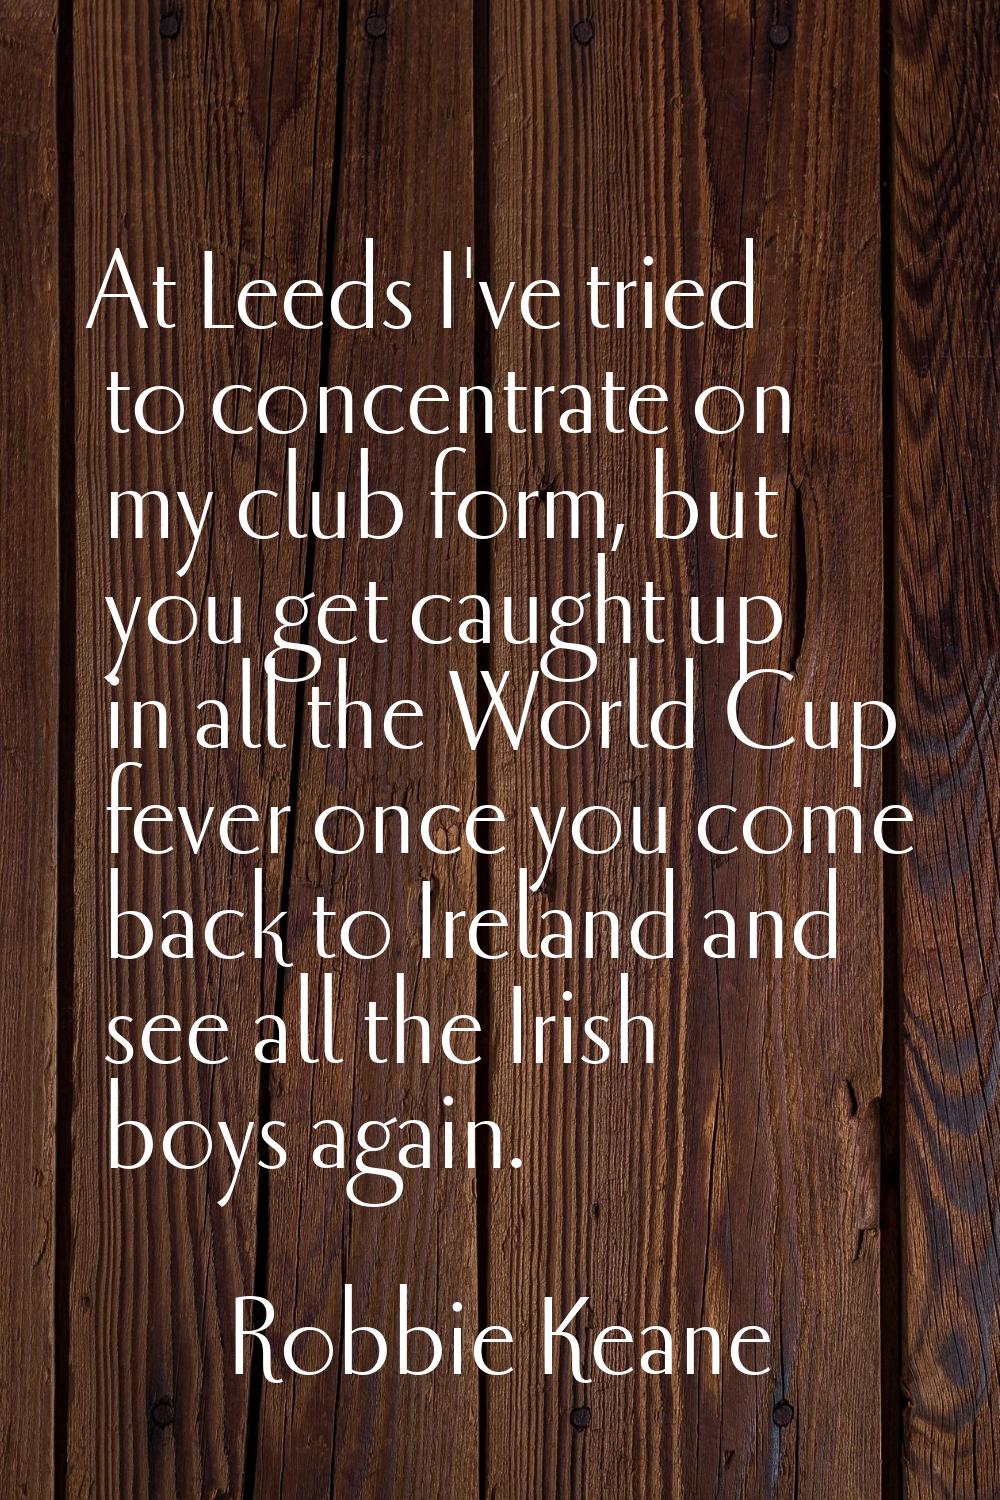 At Leeds I've tried to concentrate on my club form, but you get caught up in all the World Cup feve